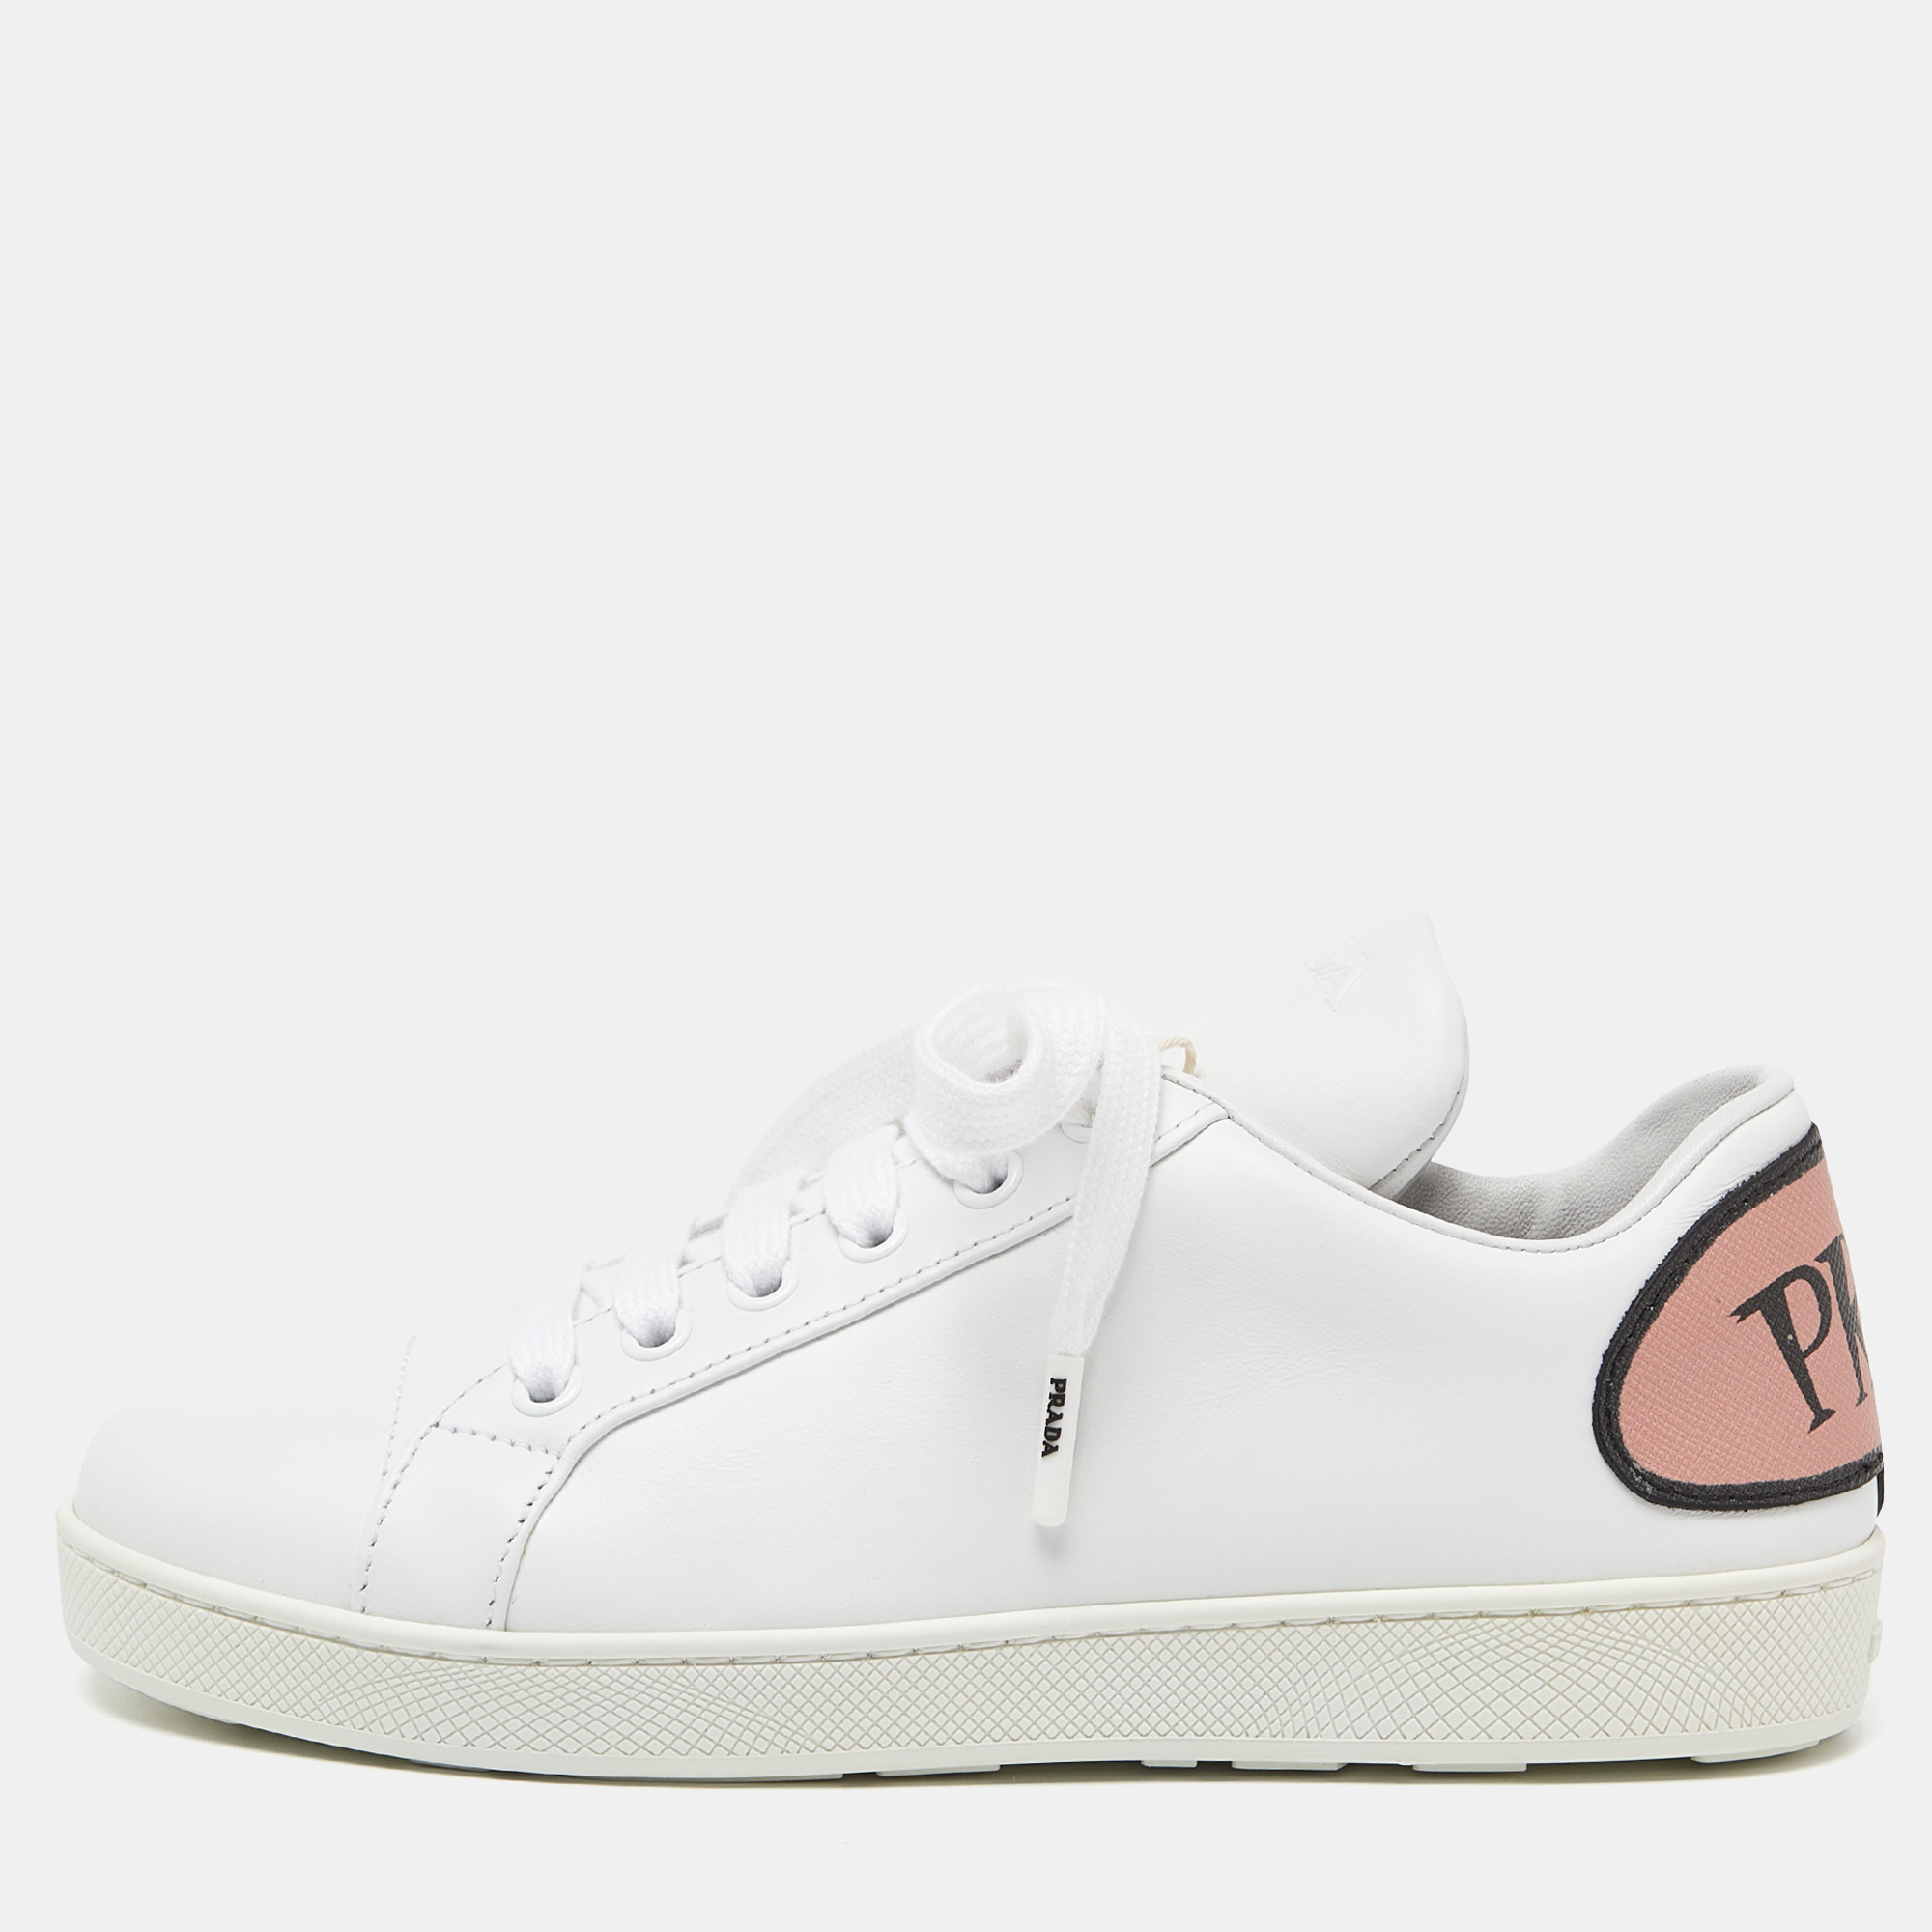 Prada white leather lace-up sneakers 35